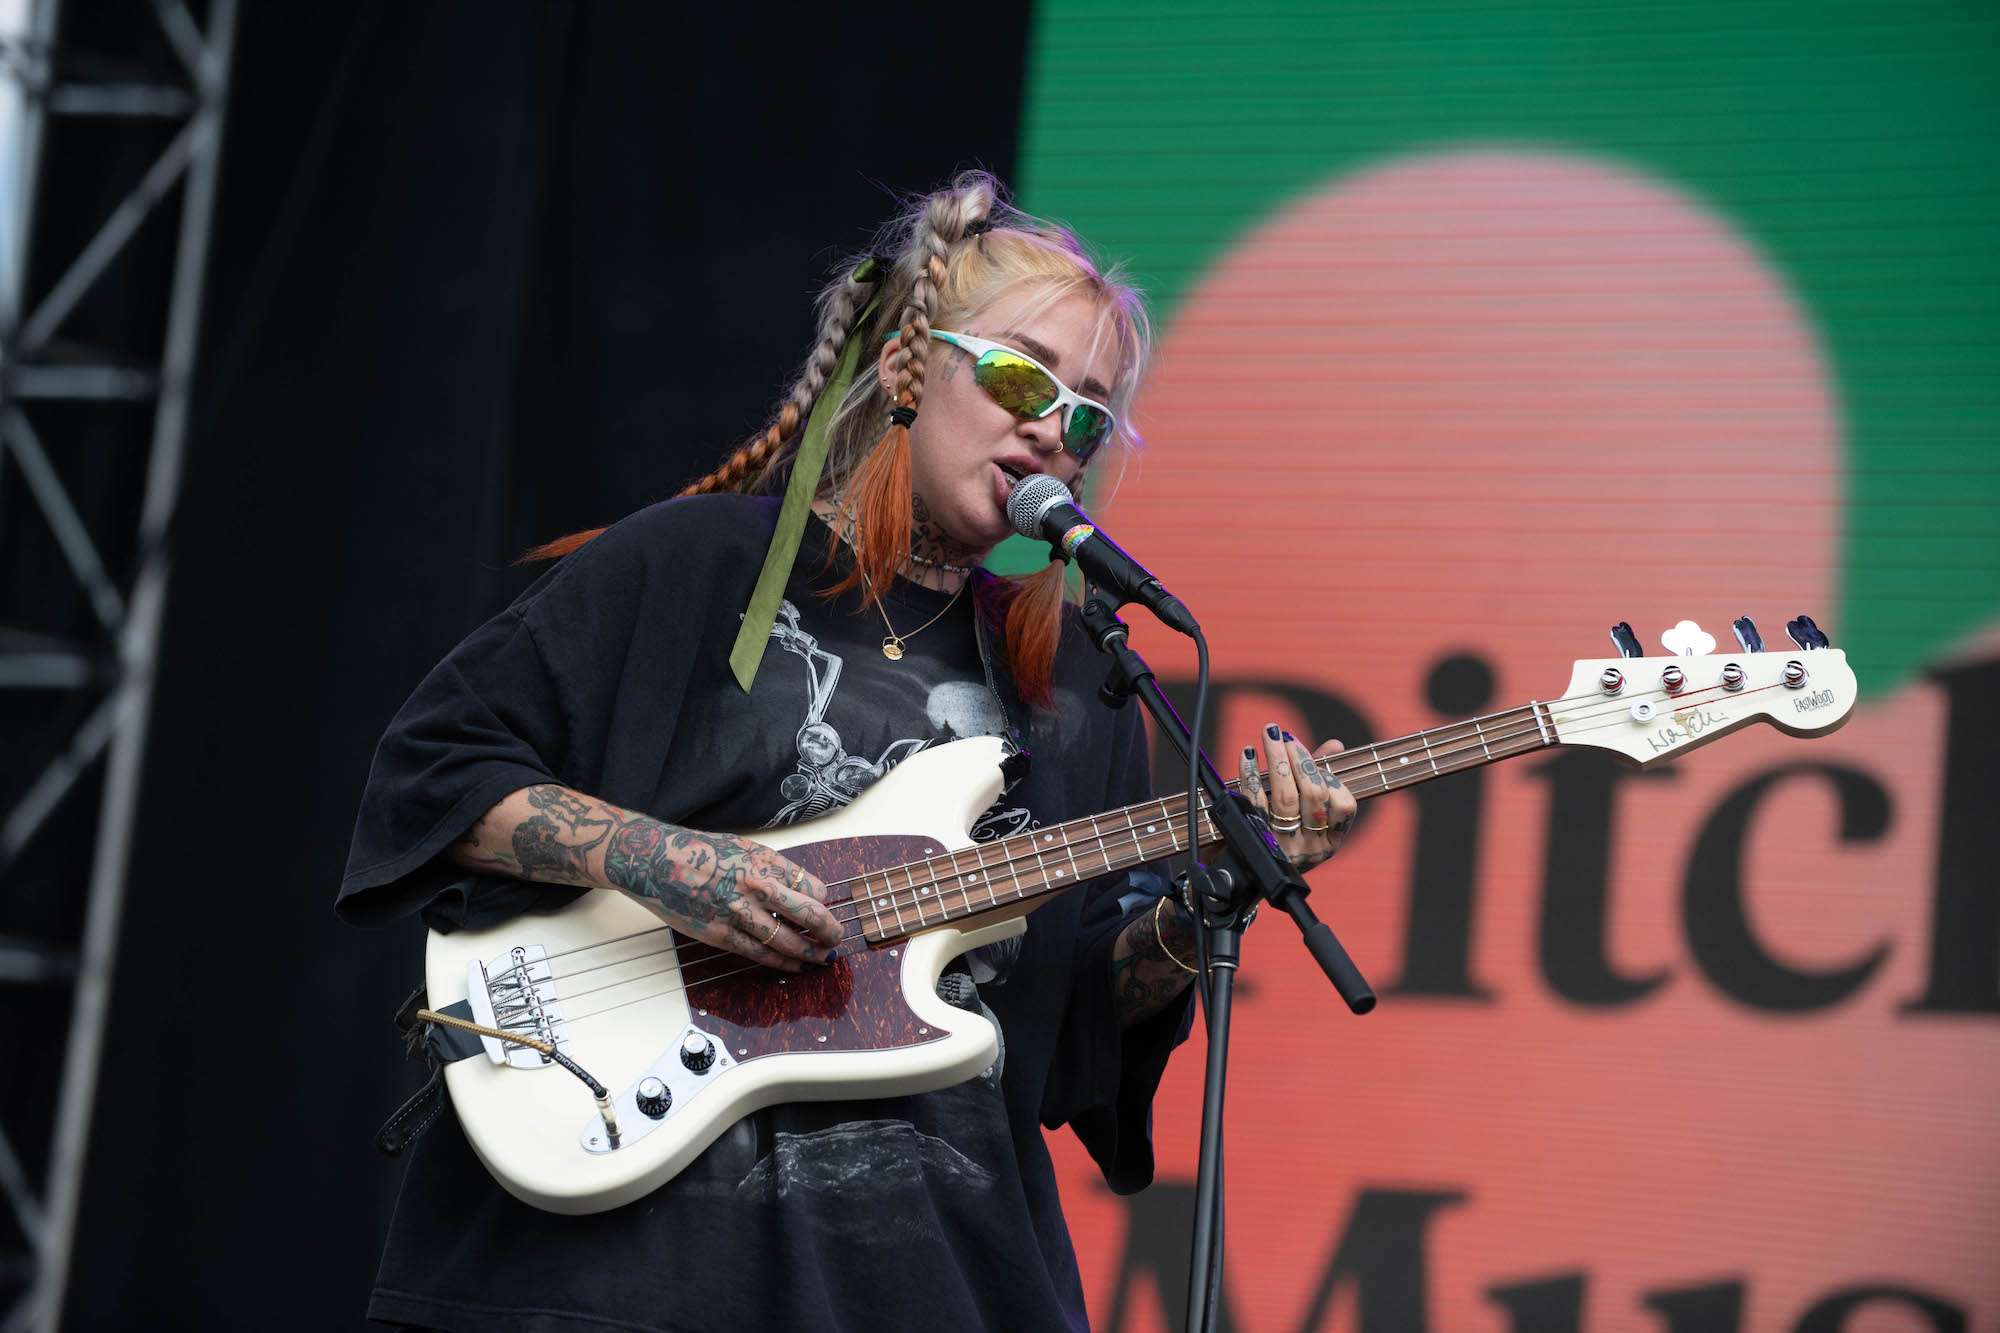 DEHD Live at Pitchfork [GALLERY] 4